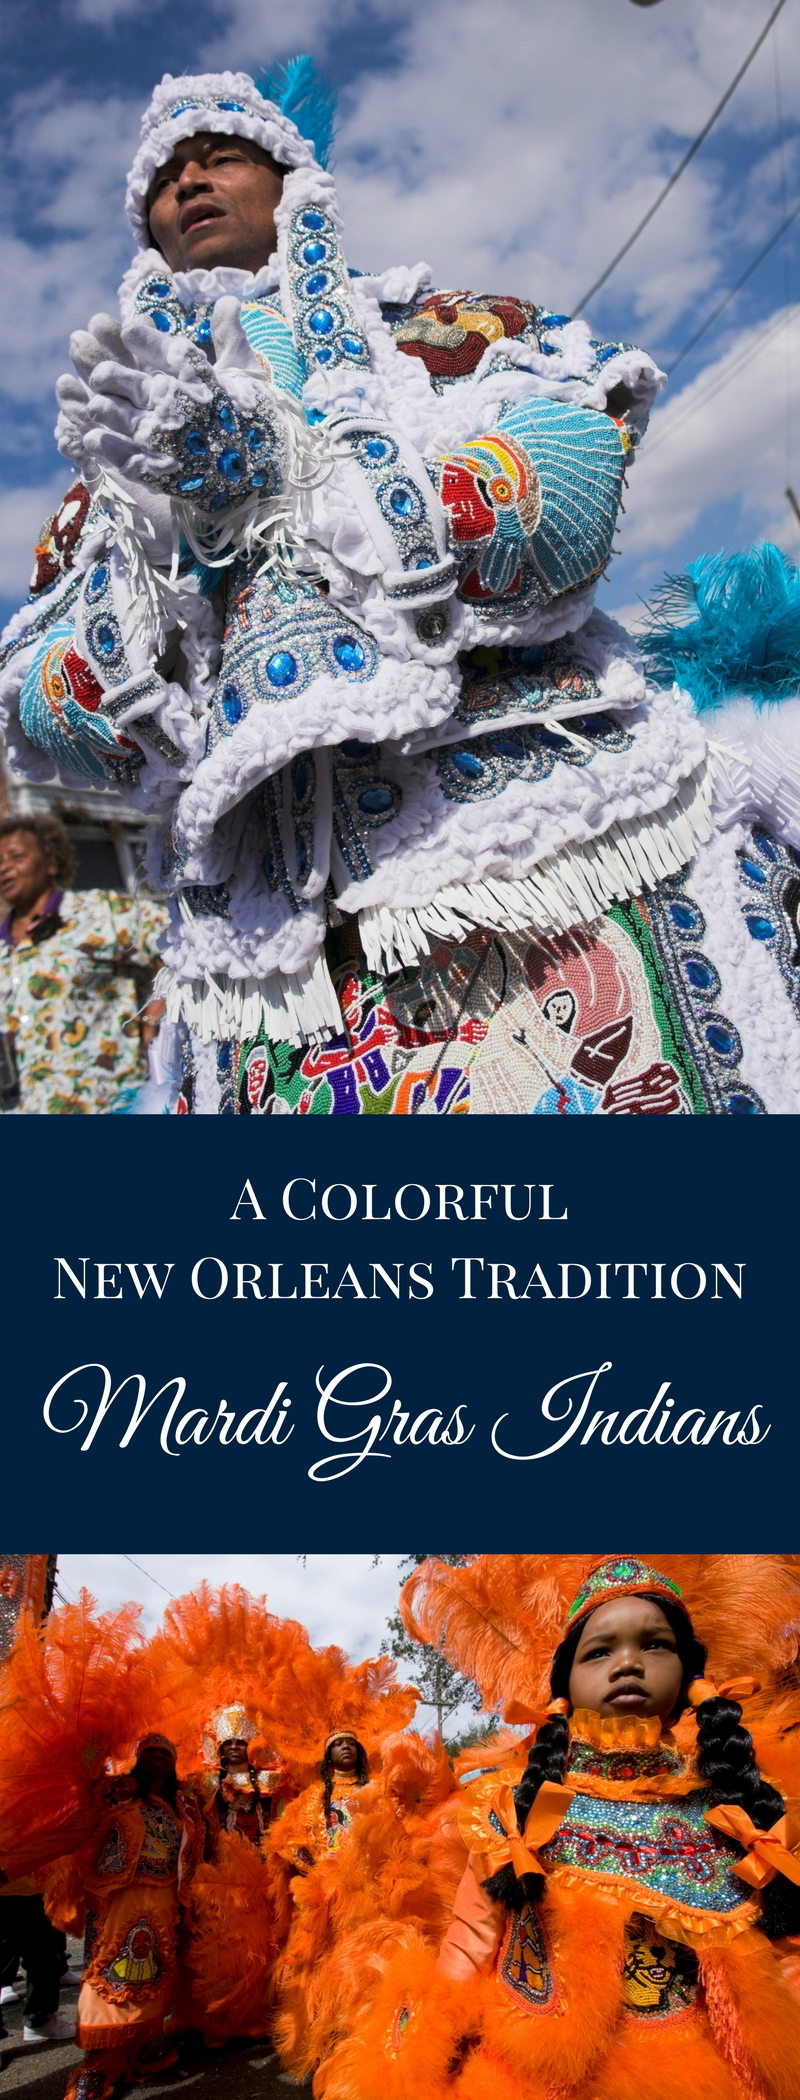 One of the most colorful (and secretive) of Carnival traditions has a second showing. The Mardi Gras Indians will strut their stuff on Super Sunday, traditionally the 3rd Sunday in March. (Photo courtesy Flickr user Derek Bridges)